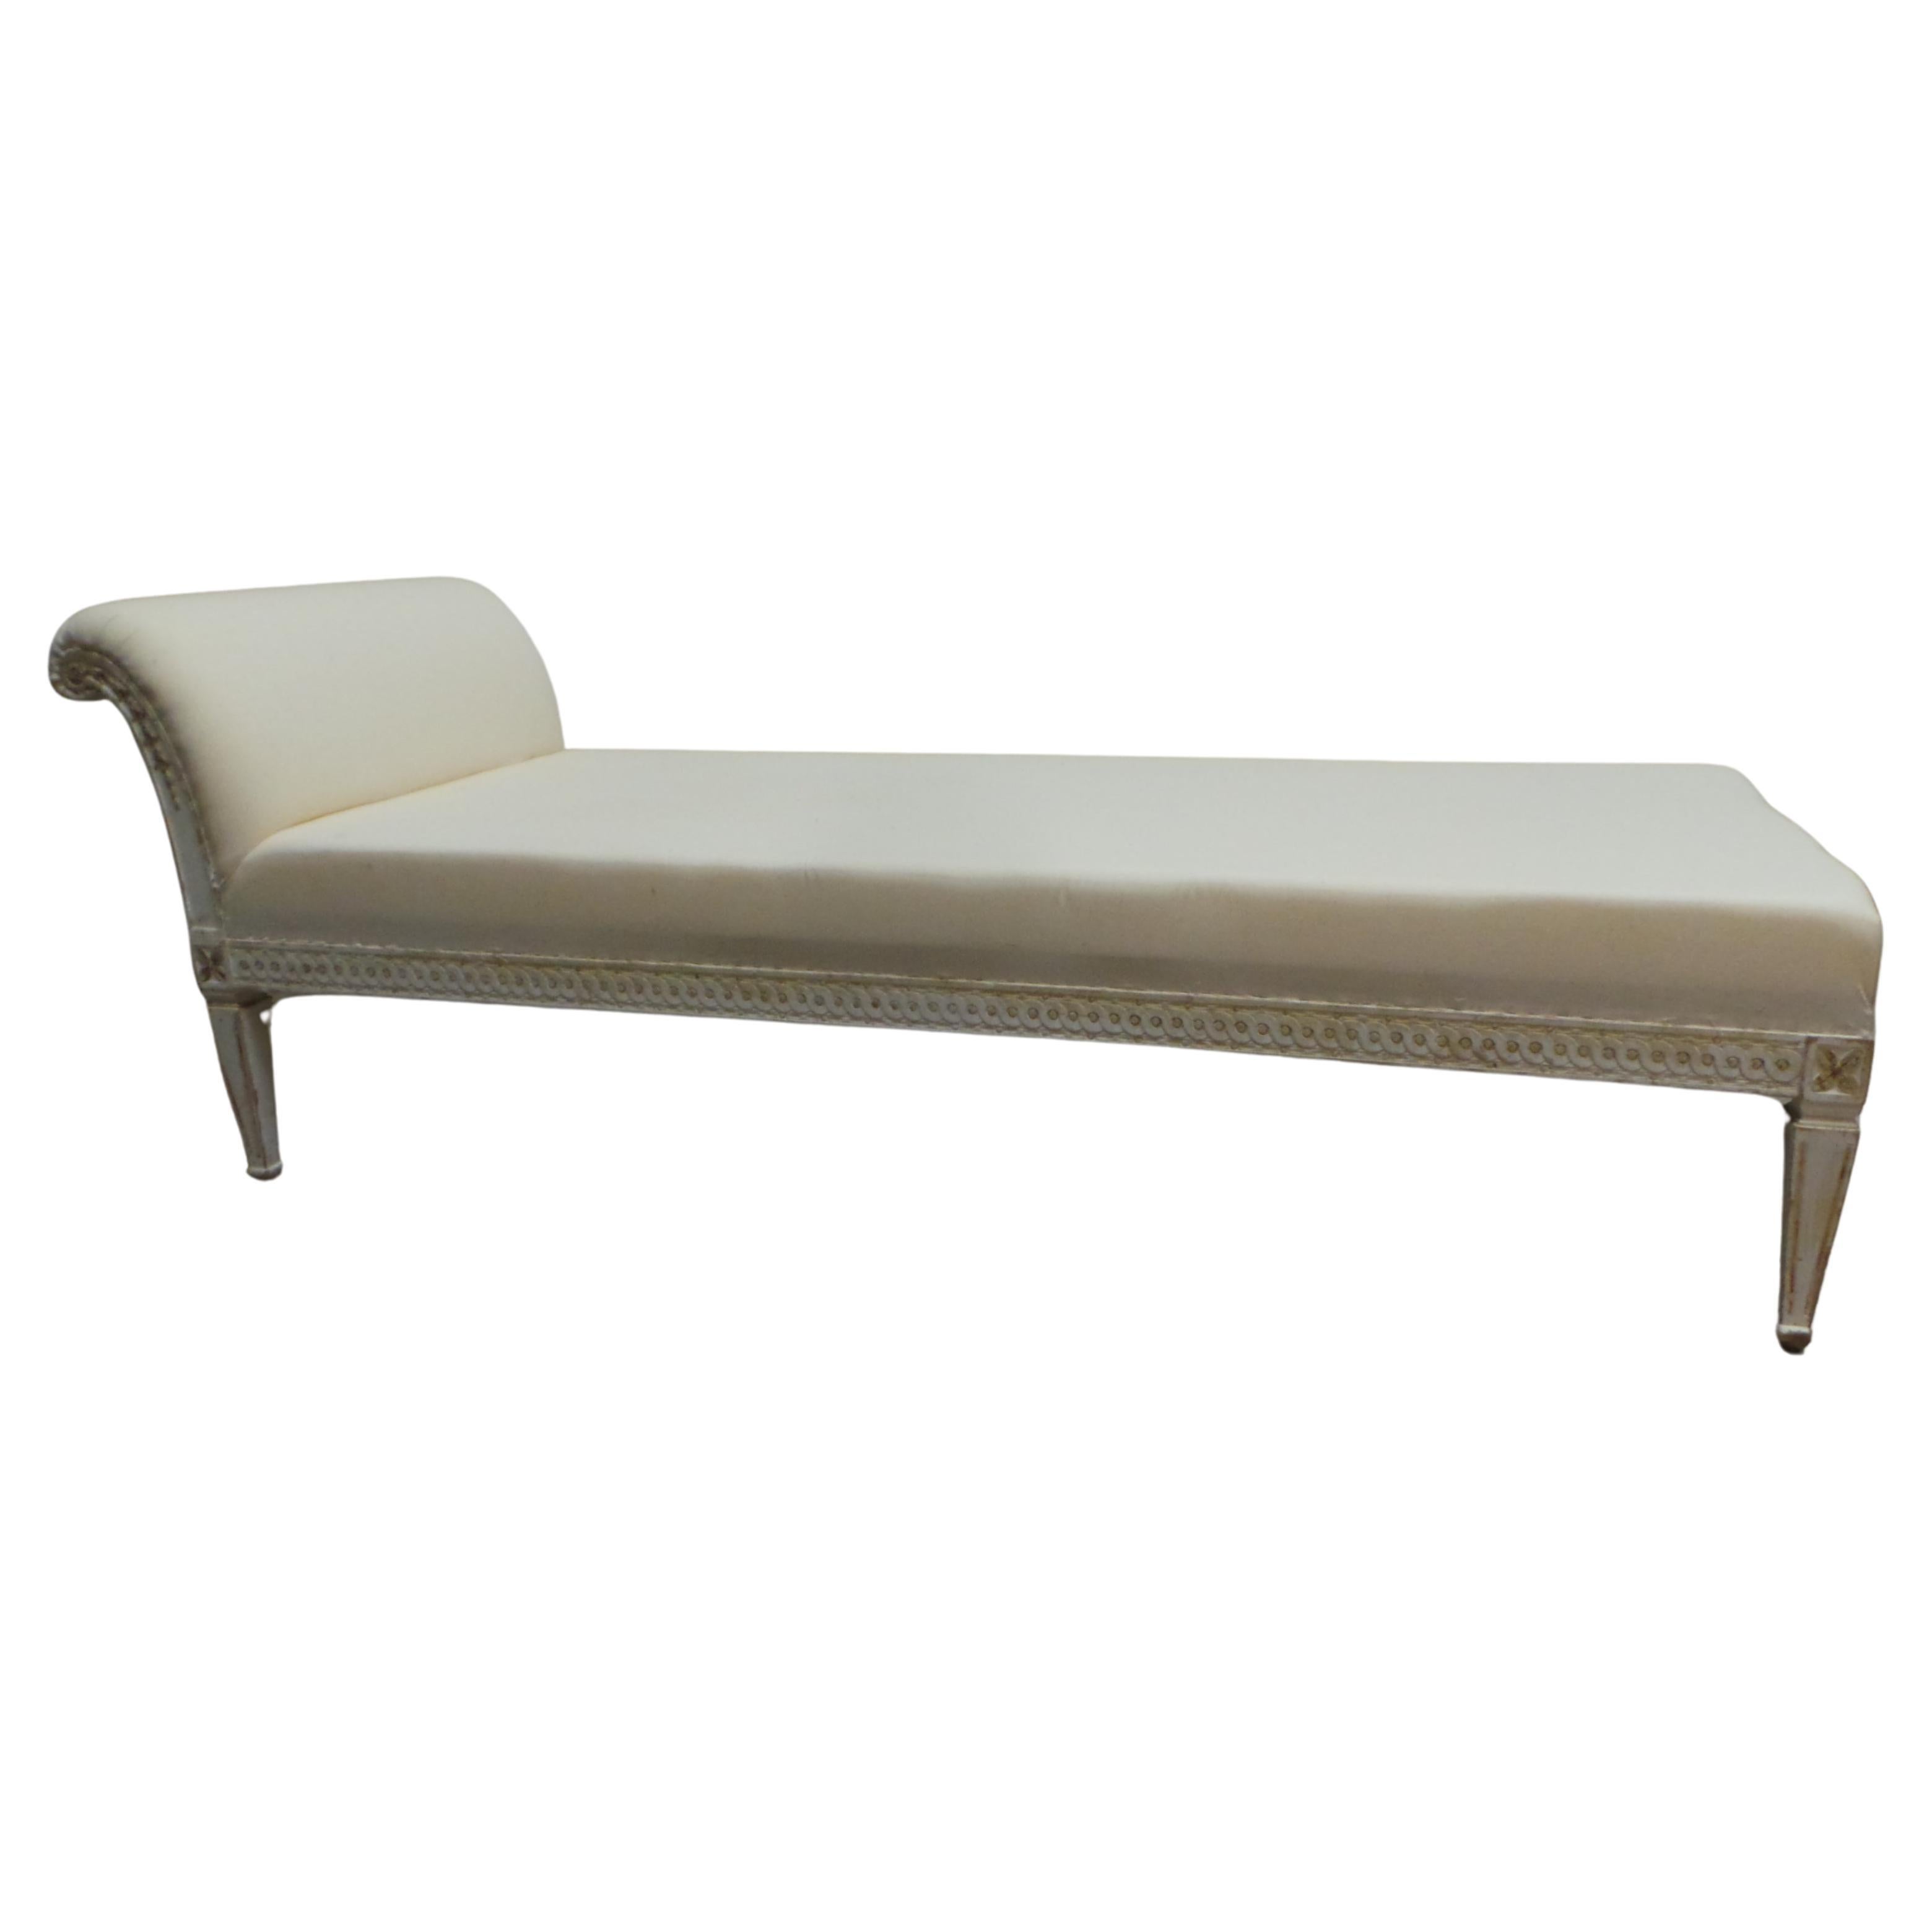 Rare Original Painted Swedish Gustavian Chaise Lounge For Sale